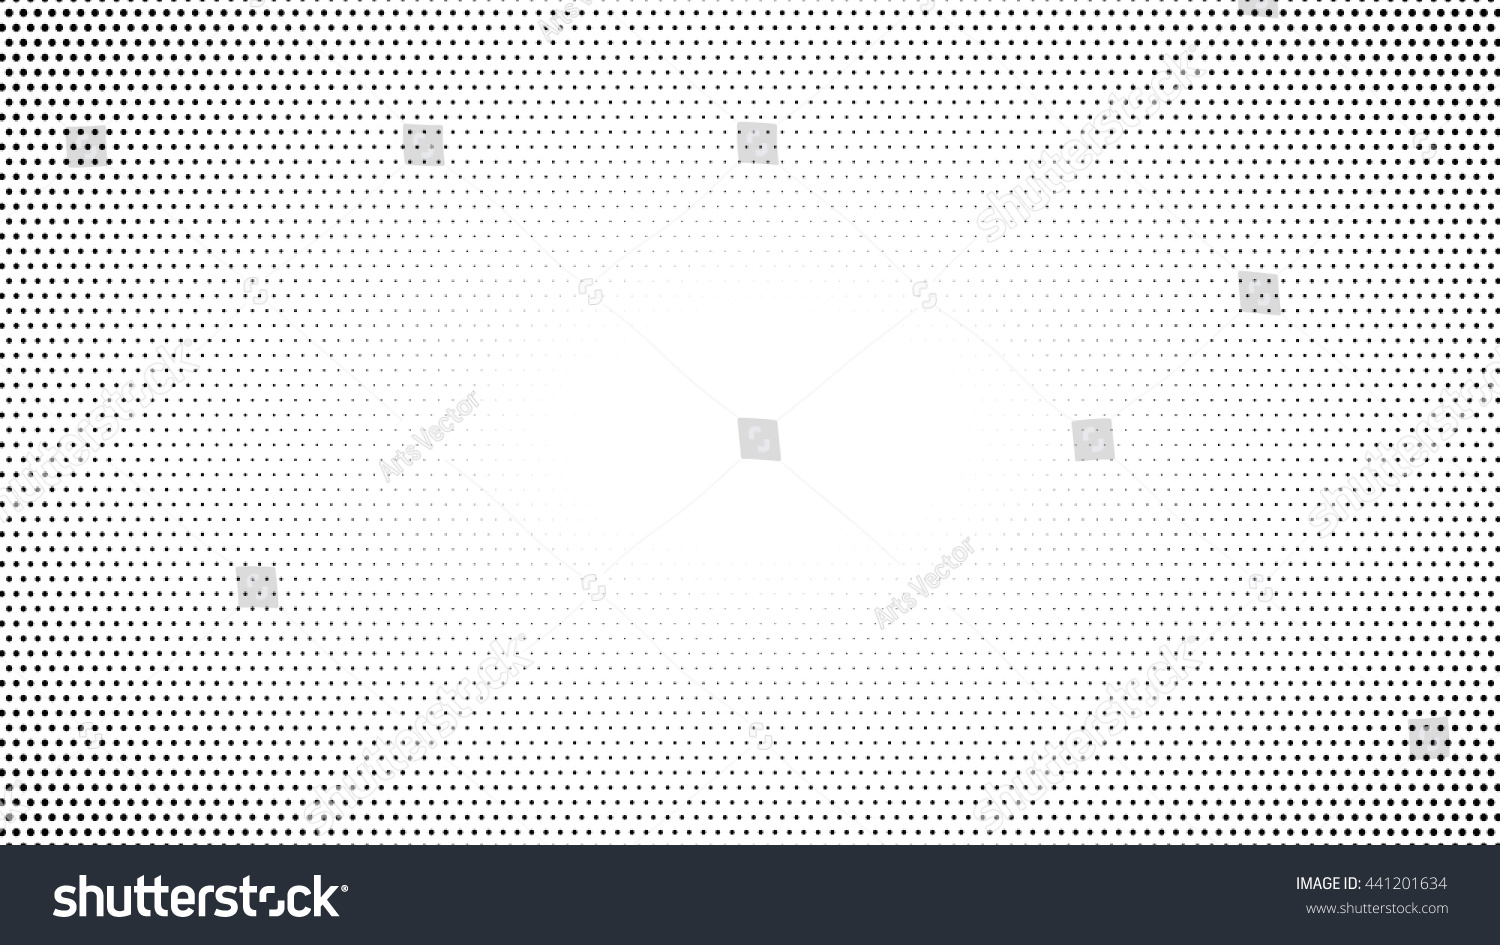 texture dot overlay pixel vector background by geometric pattern frame halftone dots #441201634